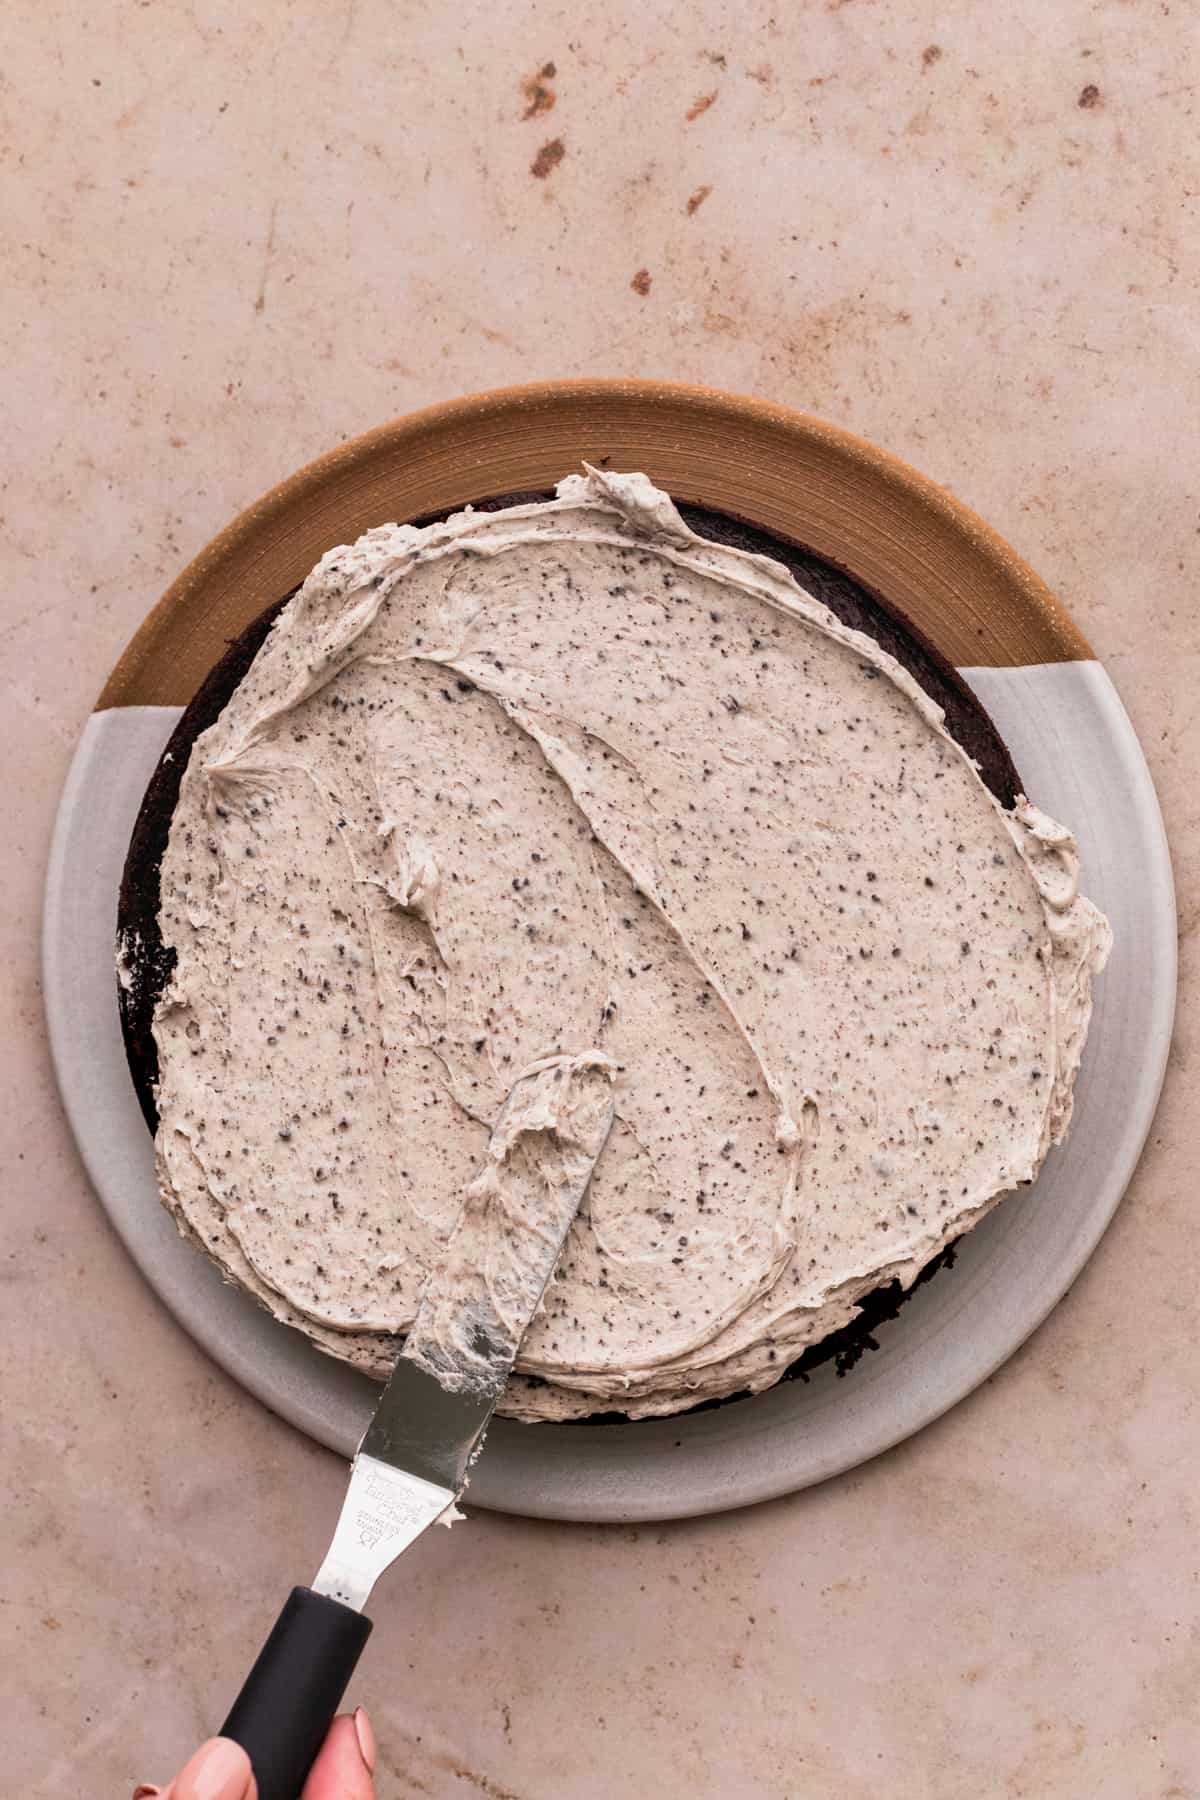 Spreading Oreo frosting on top of cake layer.